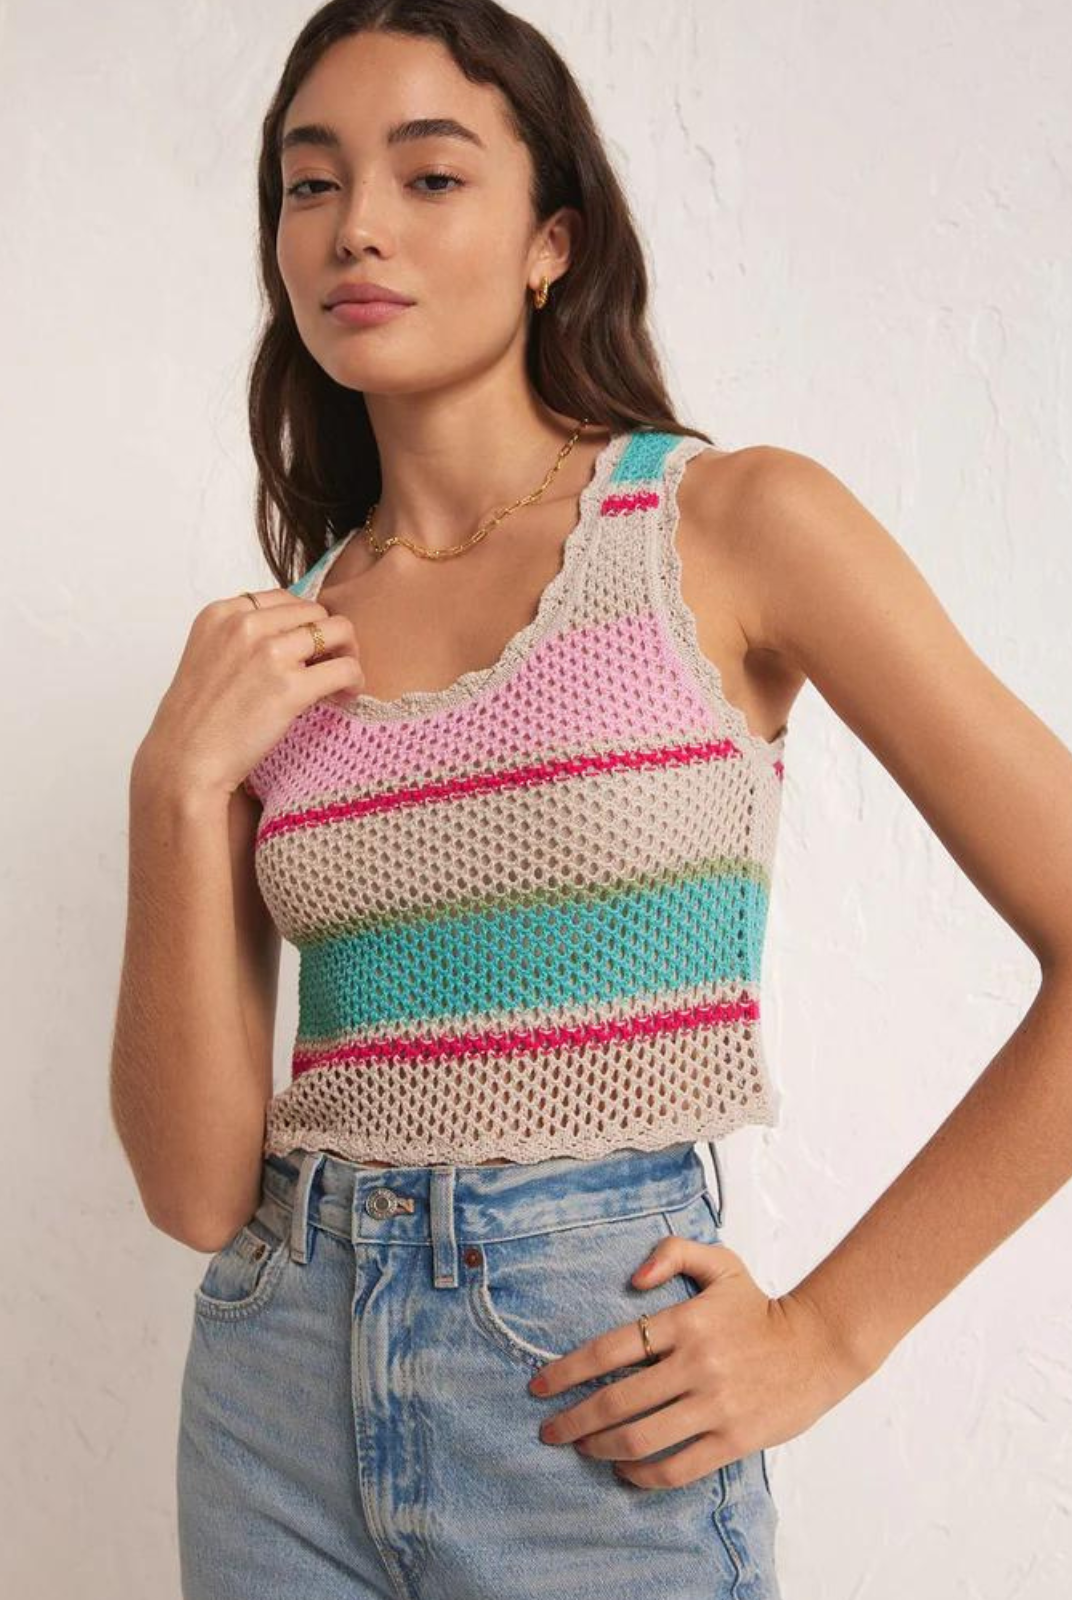 Z Supply Sol Stripe Sweater Tank Crochet styles are in this season, and this multicolor tank will brighten your day. The flattering scoop neckline and cropped design make it perfect for wearing with high rise to low rise styles.